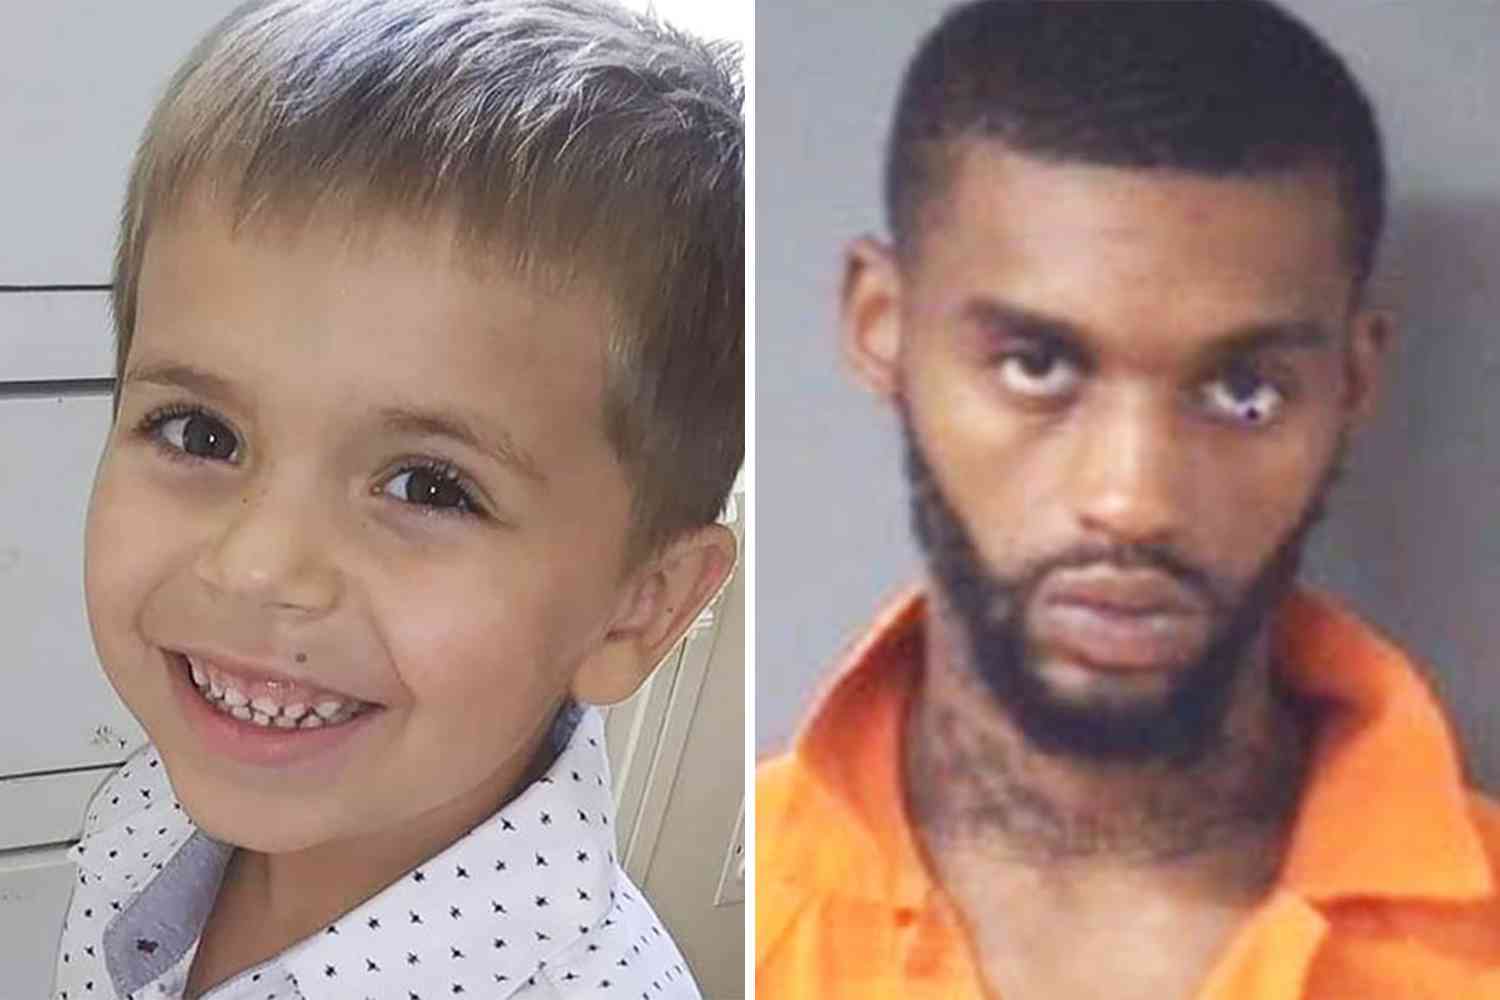 25-Year-Old Man Charged With First-Degree Murder in Death of 5-Year-Old Boy Playing Outside North Carolina Home